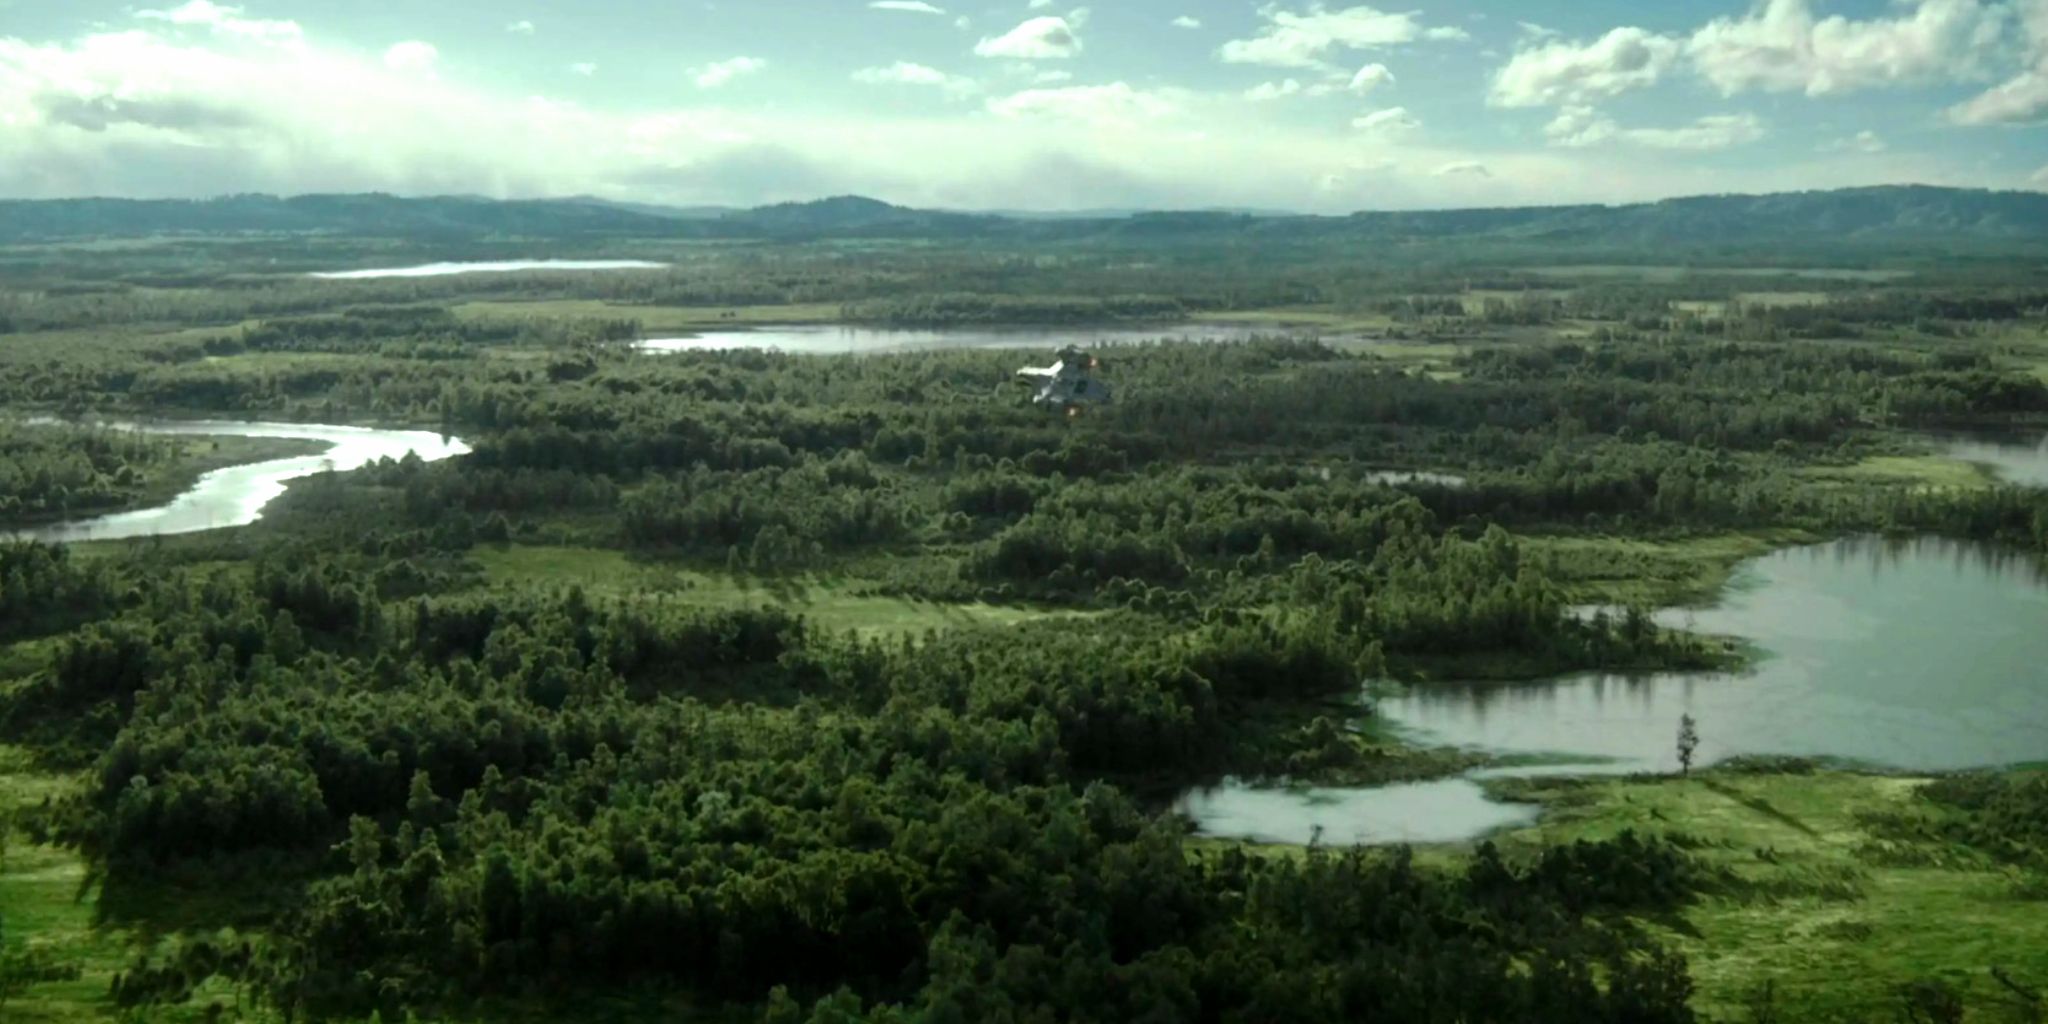 The Razor Crest soars above the planet of Sorgan and its trees and ponds in The Mandalorian season 1, episode 4